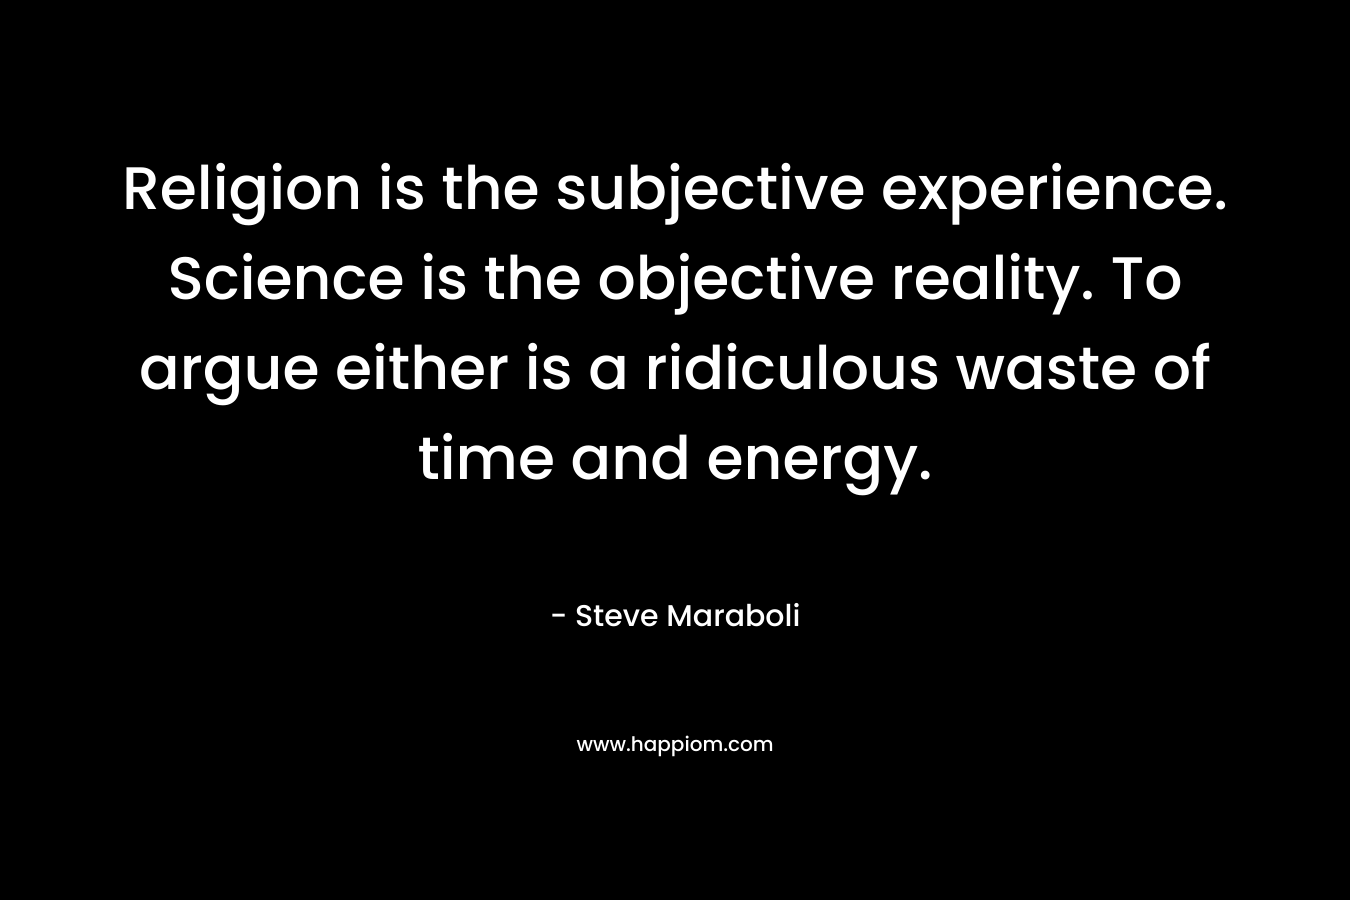 Religion is the subjective experience. Science is the objective reality. To argue either is a ridiculous waste of time and energy. – Steve Maraboli